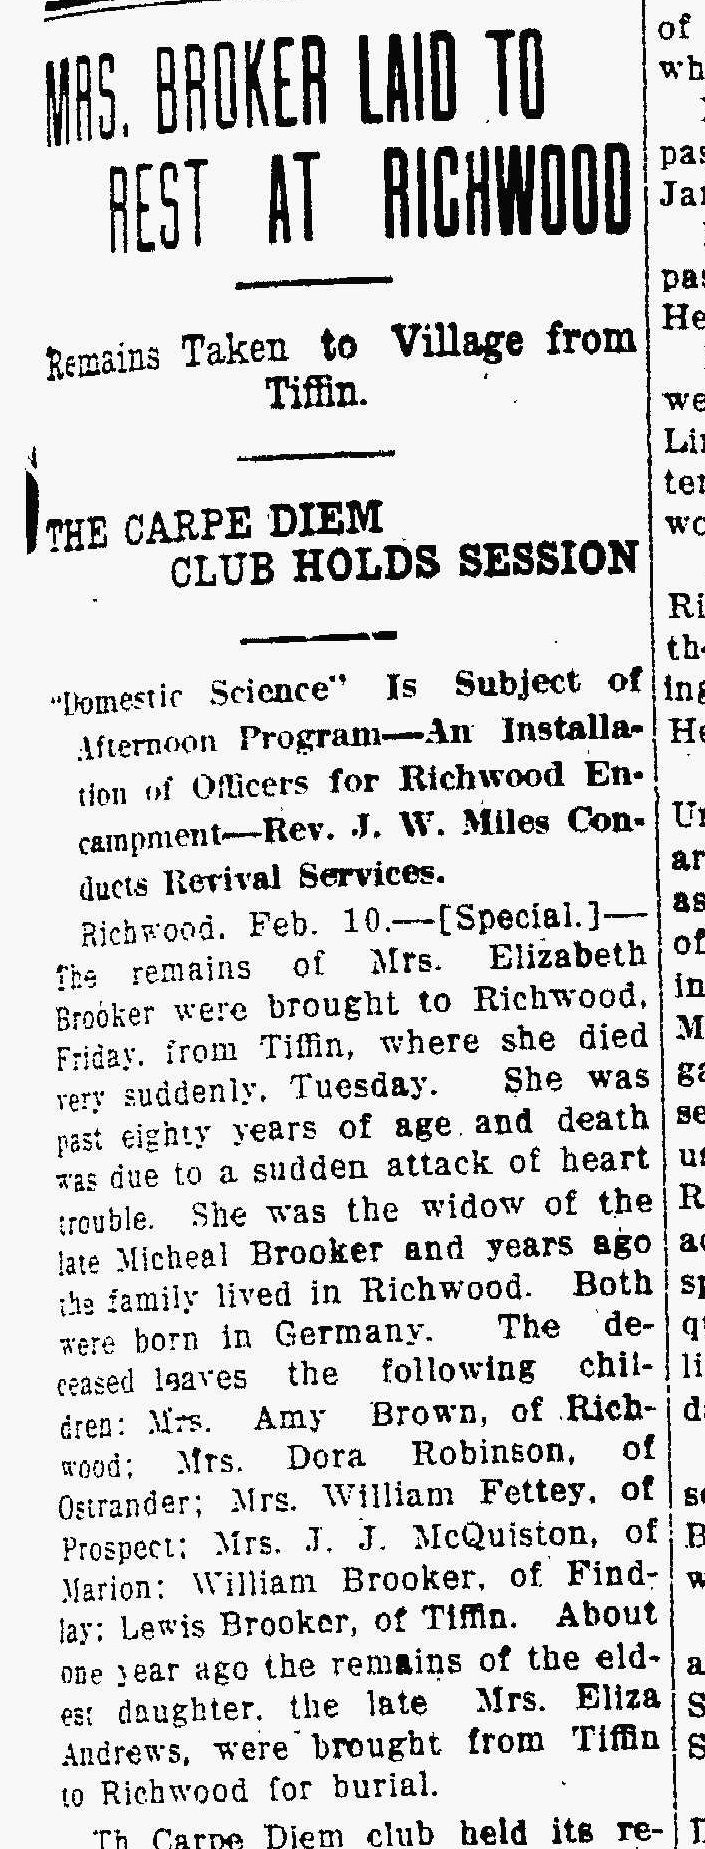 Elizabeth Brucker (Brooker) obituary in the February 11, 1914 issue of The Marion Daily Star